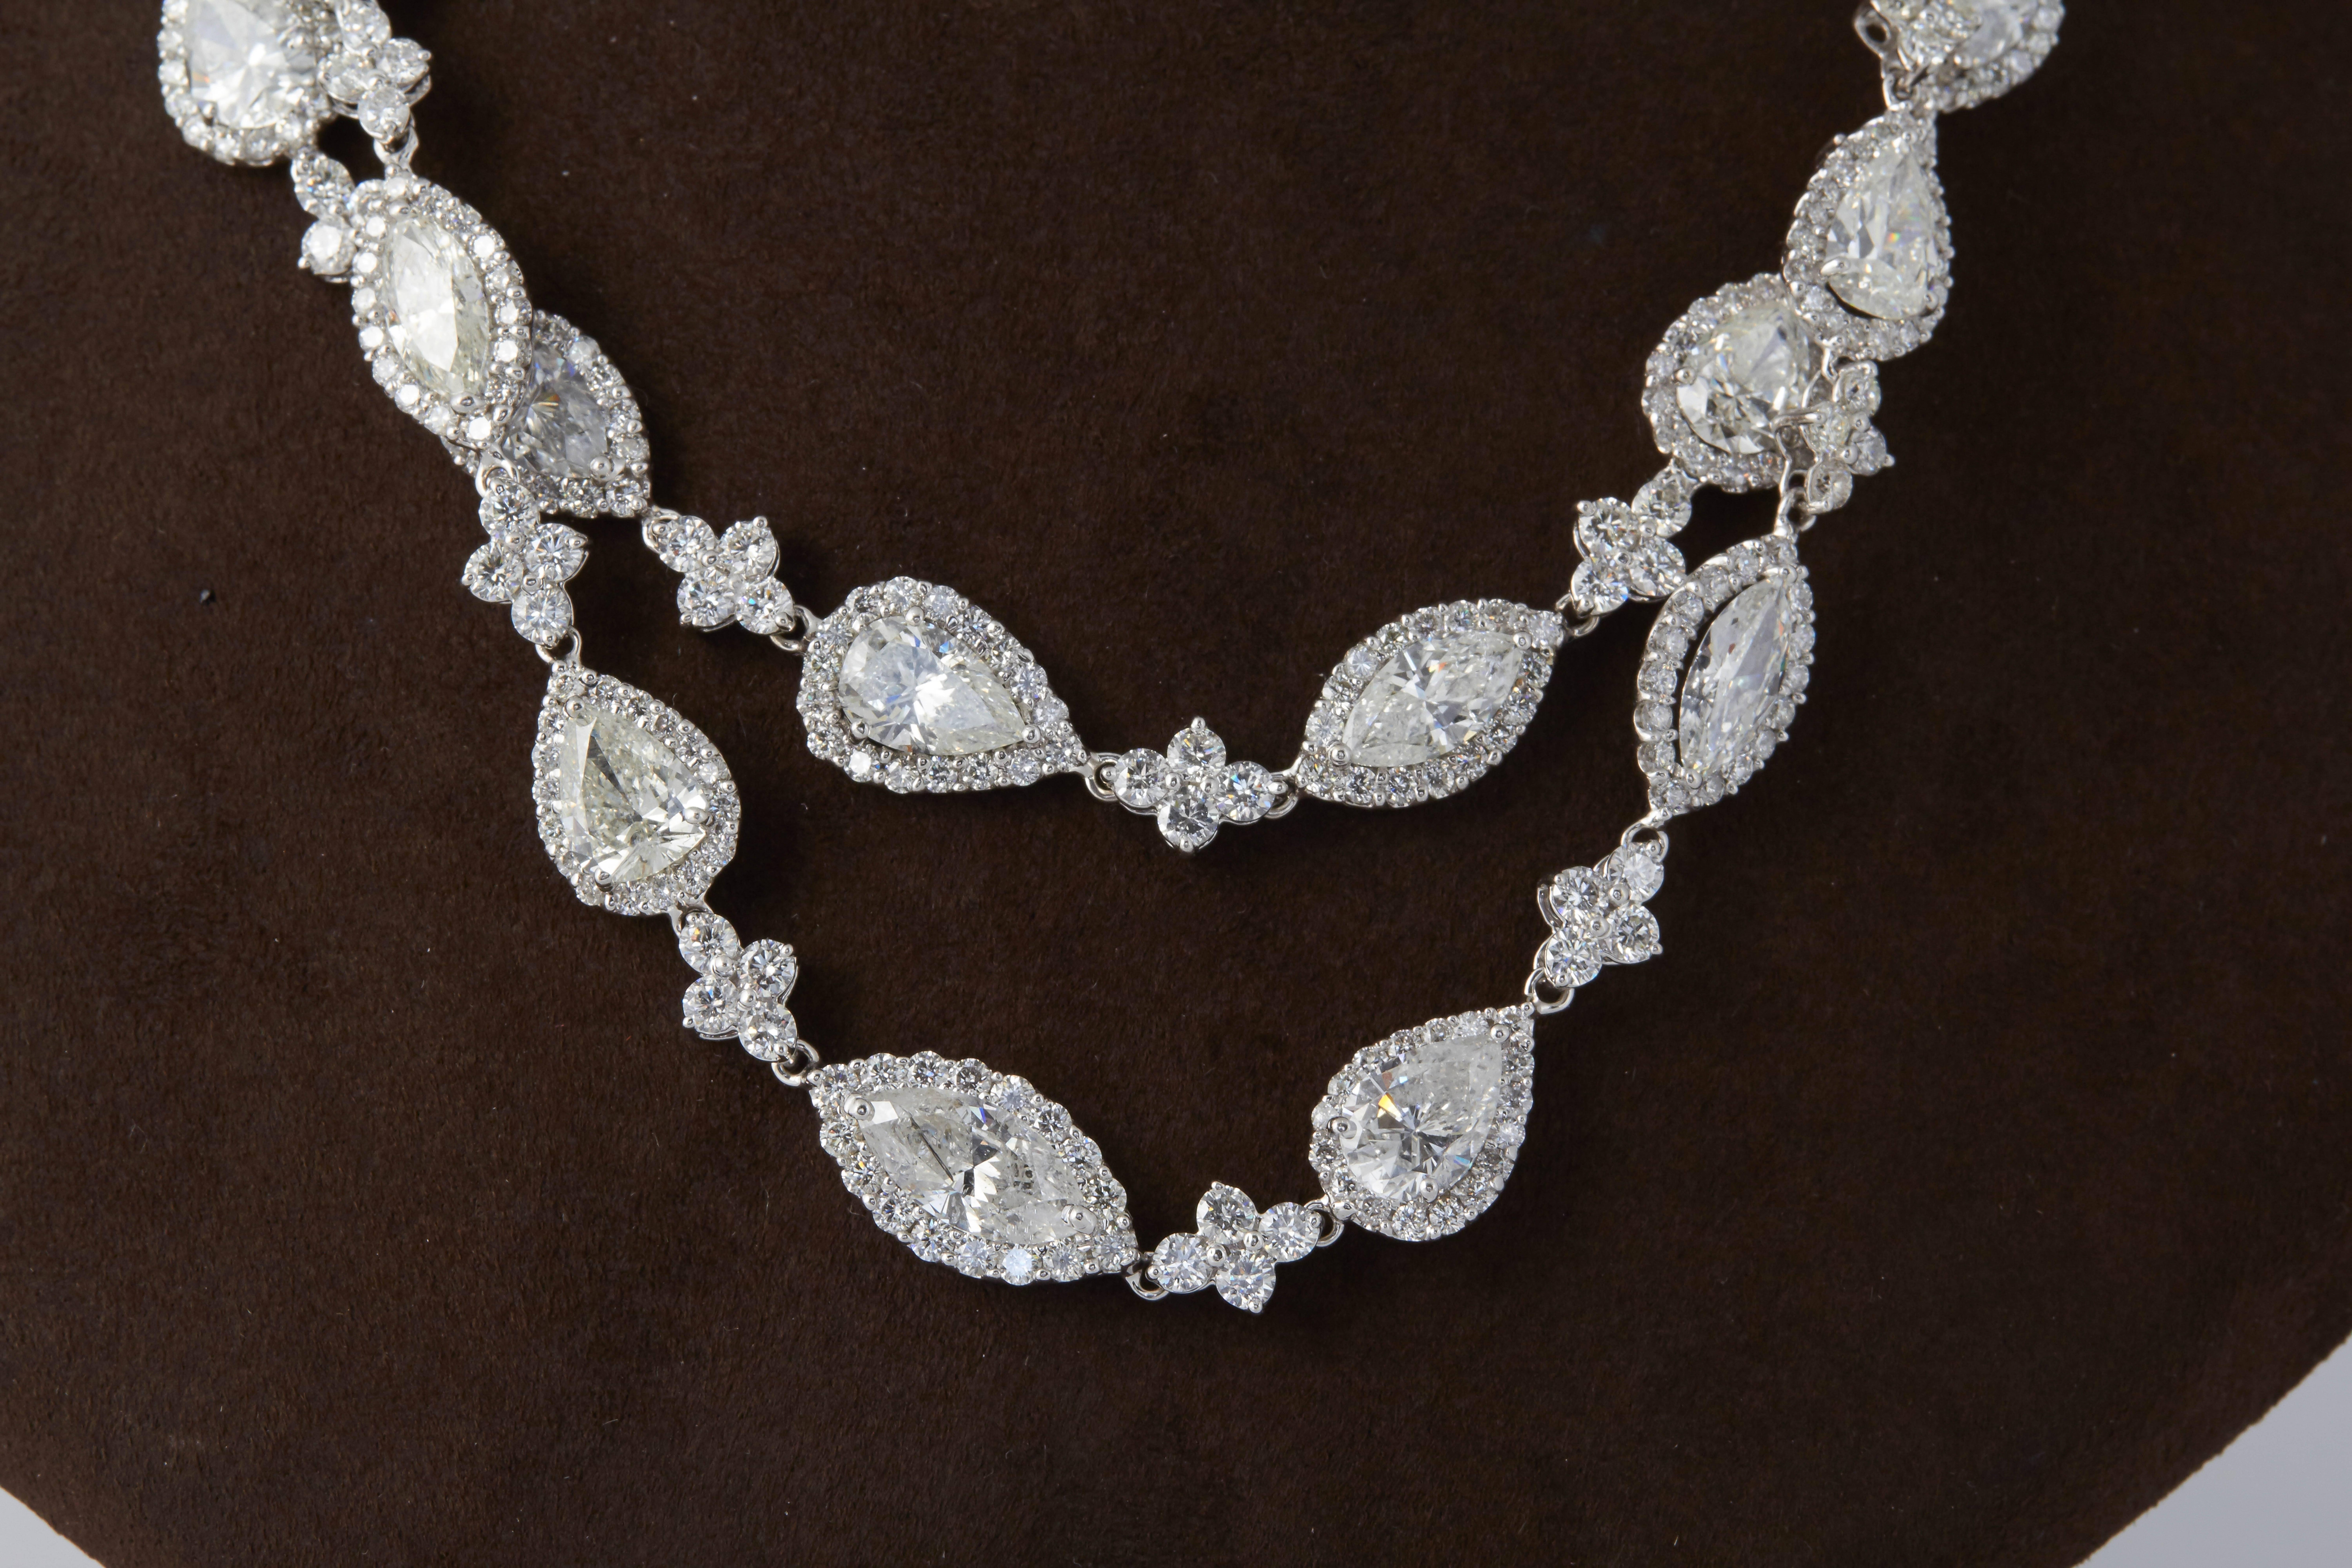 
A beautiful diamond necklace! 

Multiple shaped large diamonds each surrounded by smaller white round brilliants. 

31.85 carats of pear, marquise, trillion, and emerald cut center diamonds surrounded by 16.22 carats of round brilliant diamond